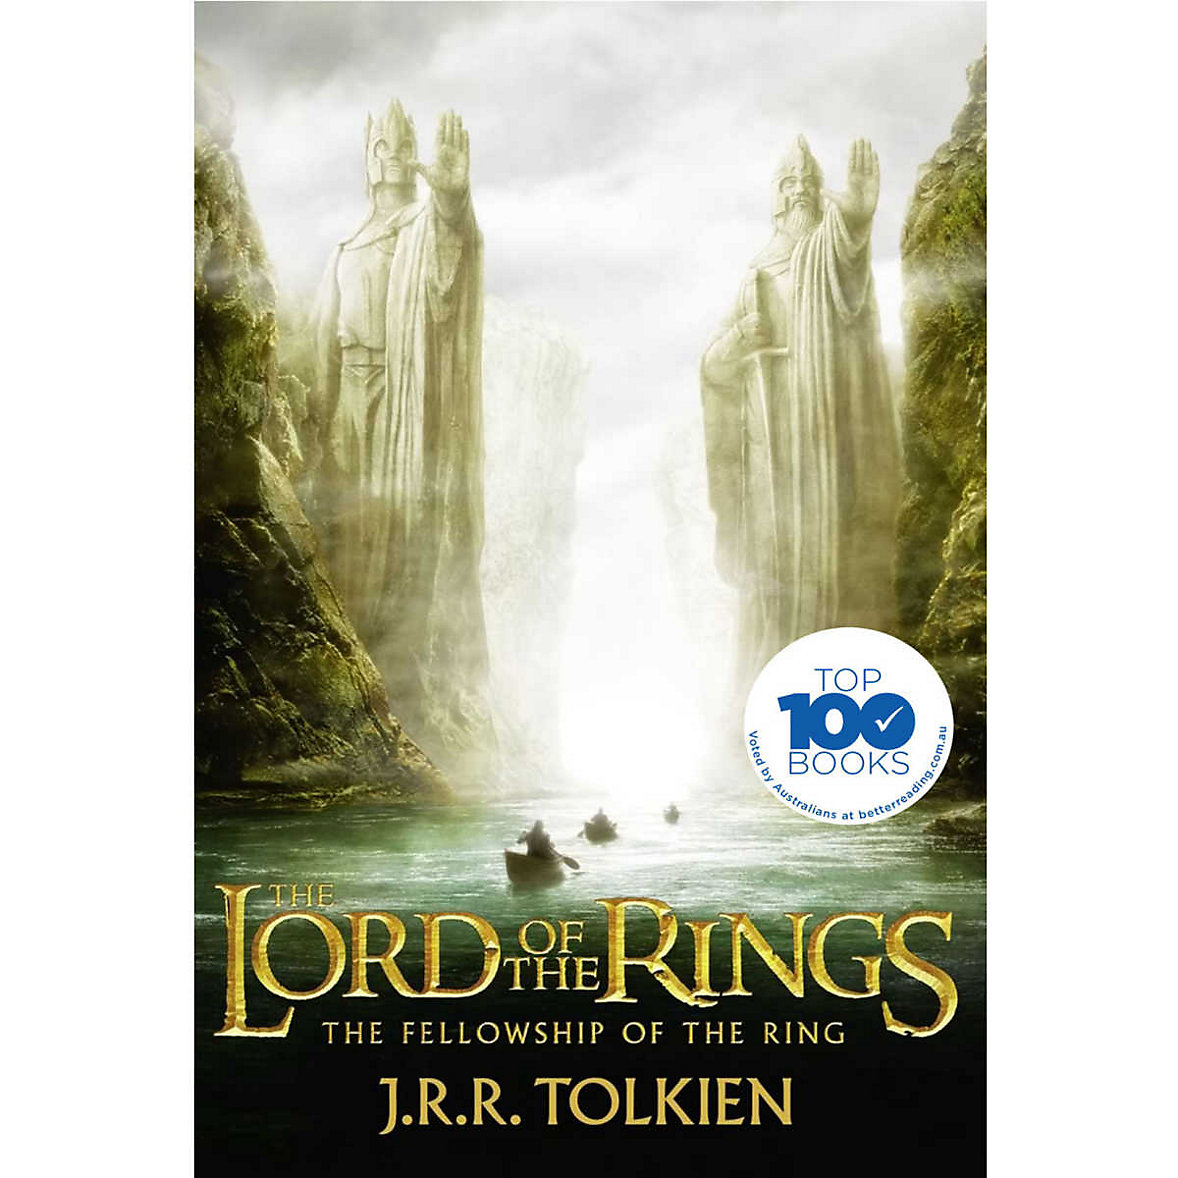 Lord of the Rings - J.R.R. Tolkein